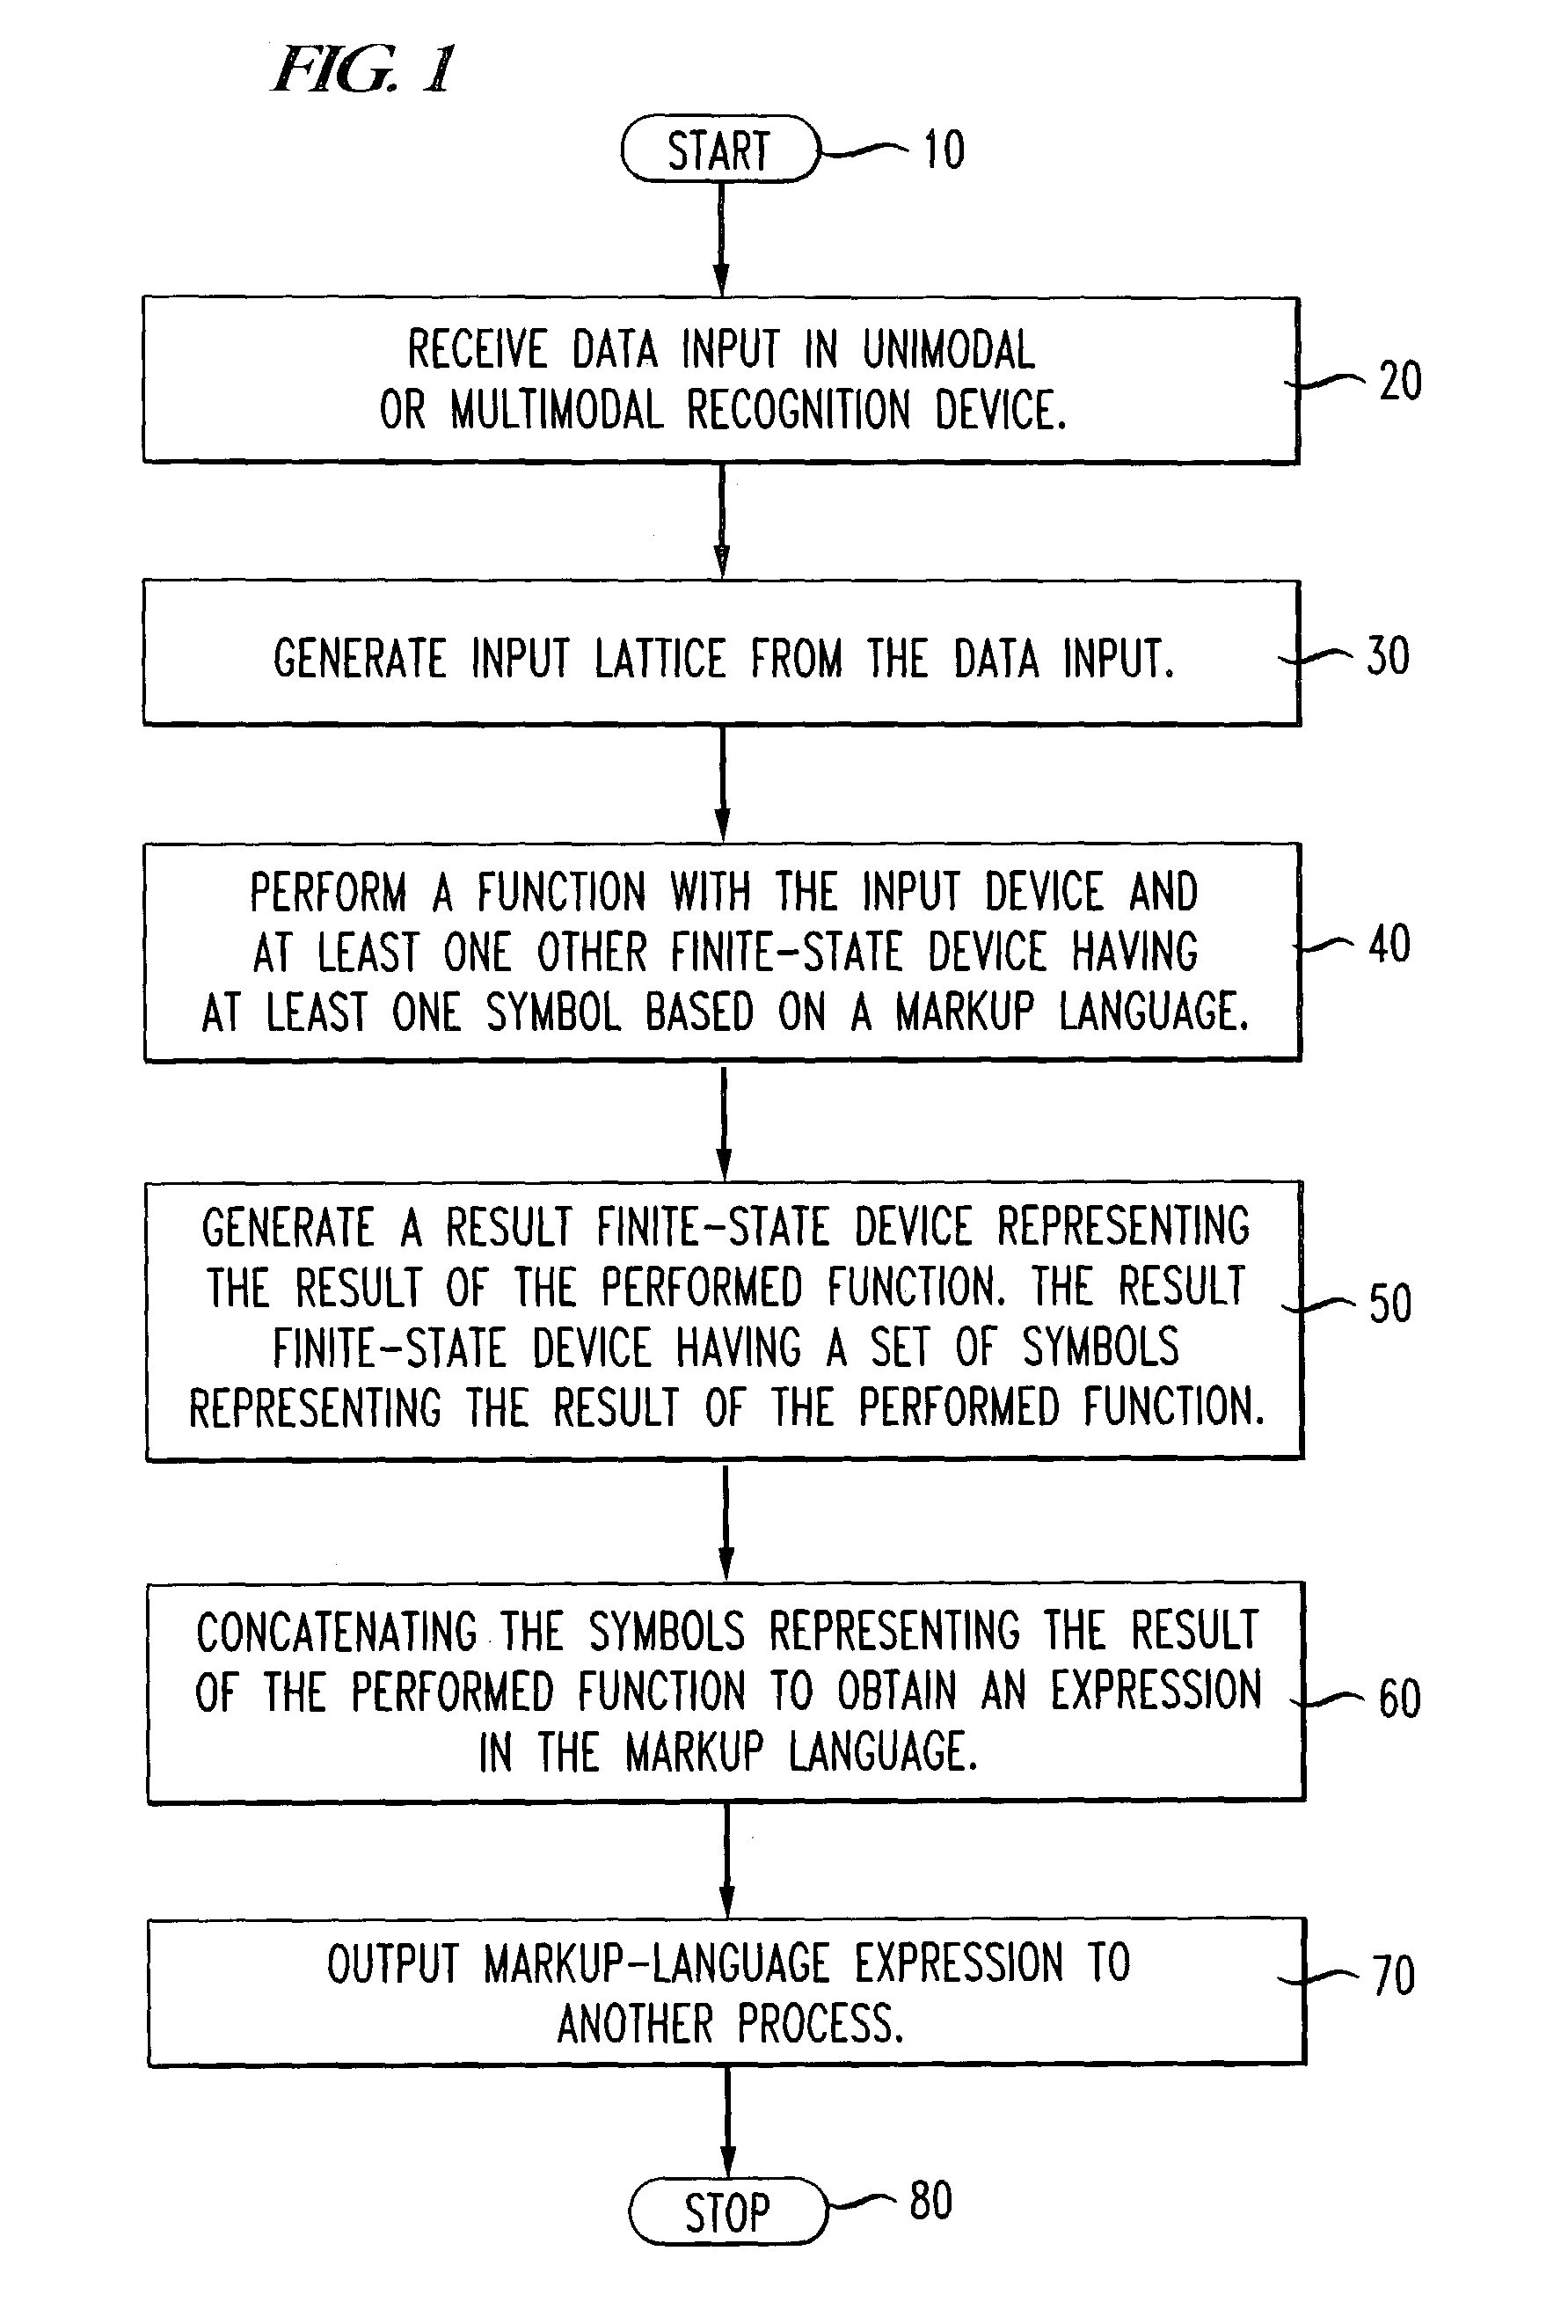 Systems and methods for generating markup-language based expressions from multi-modal and unimodal inputs